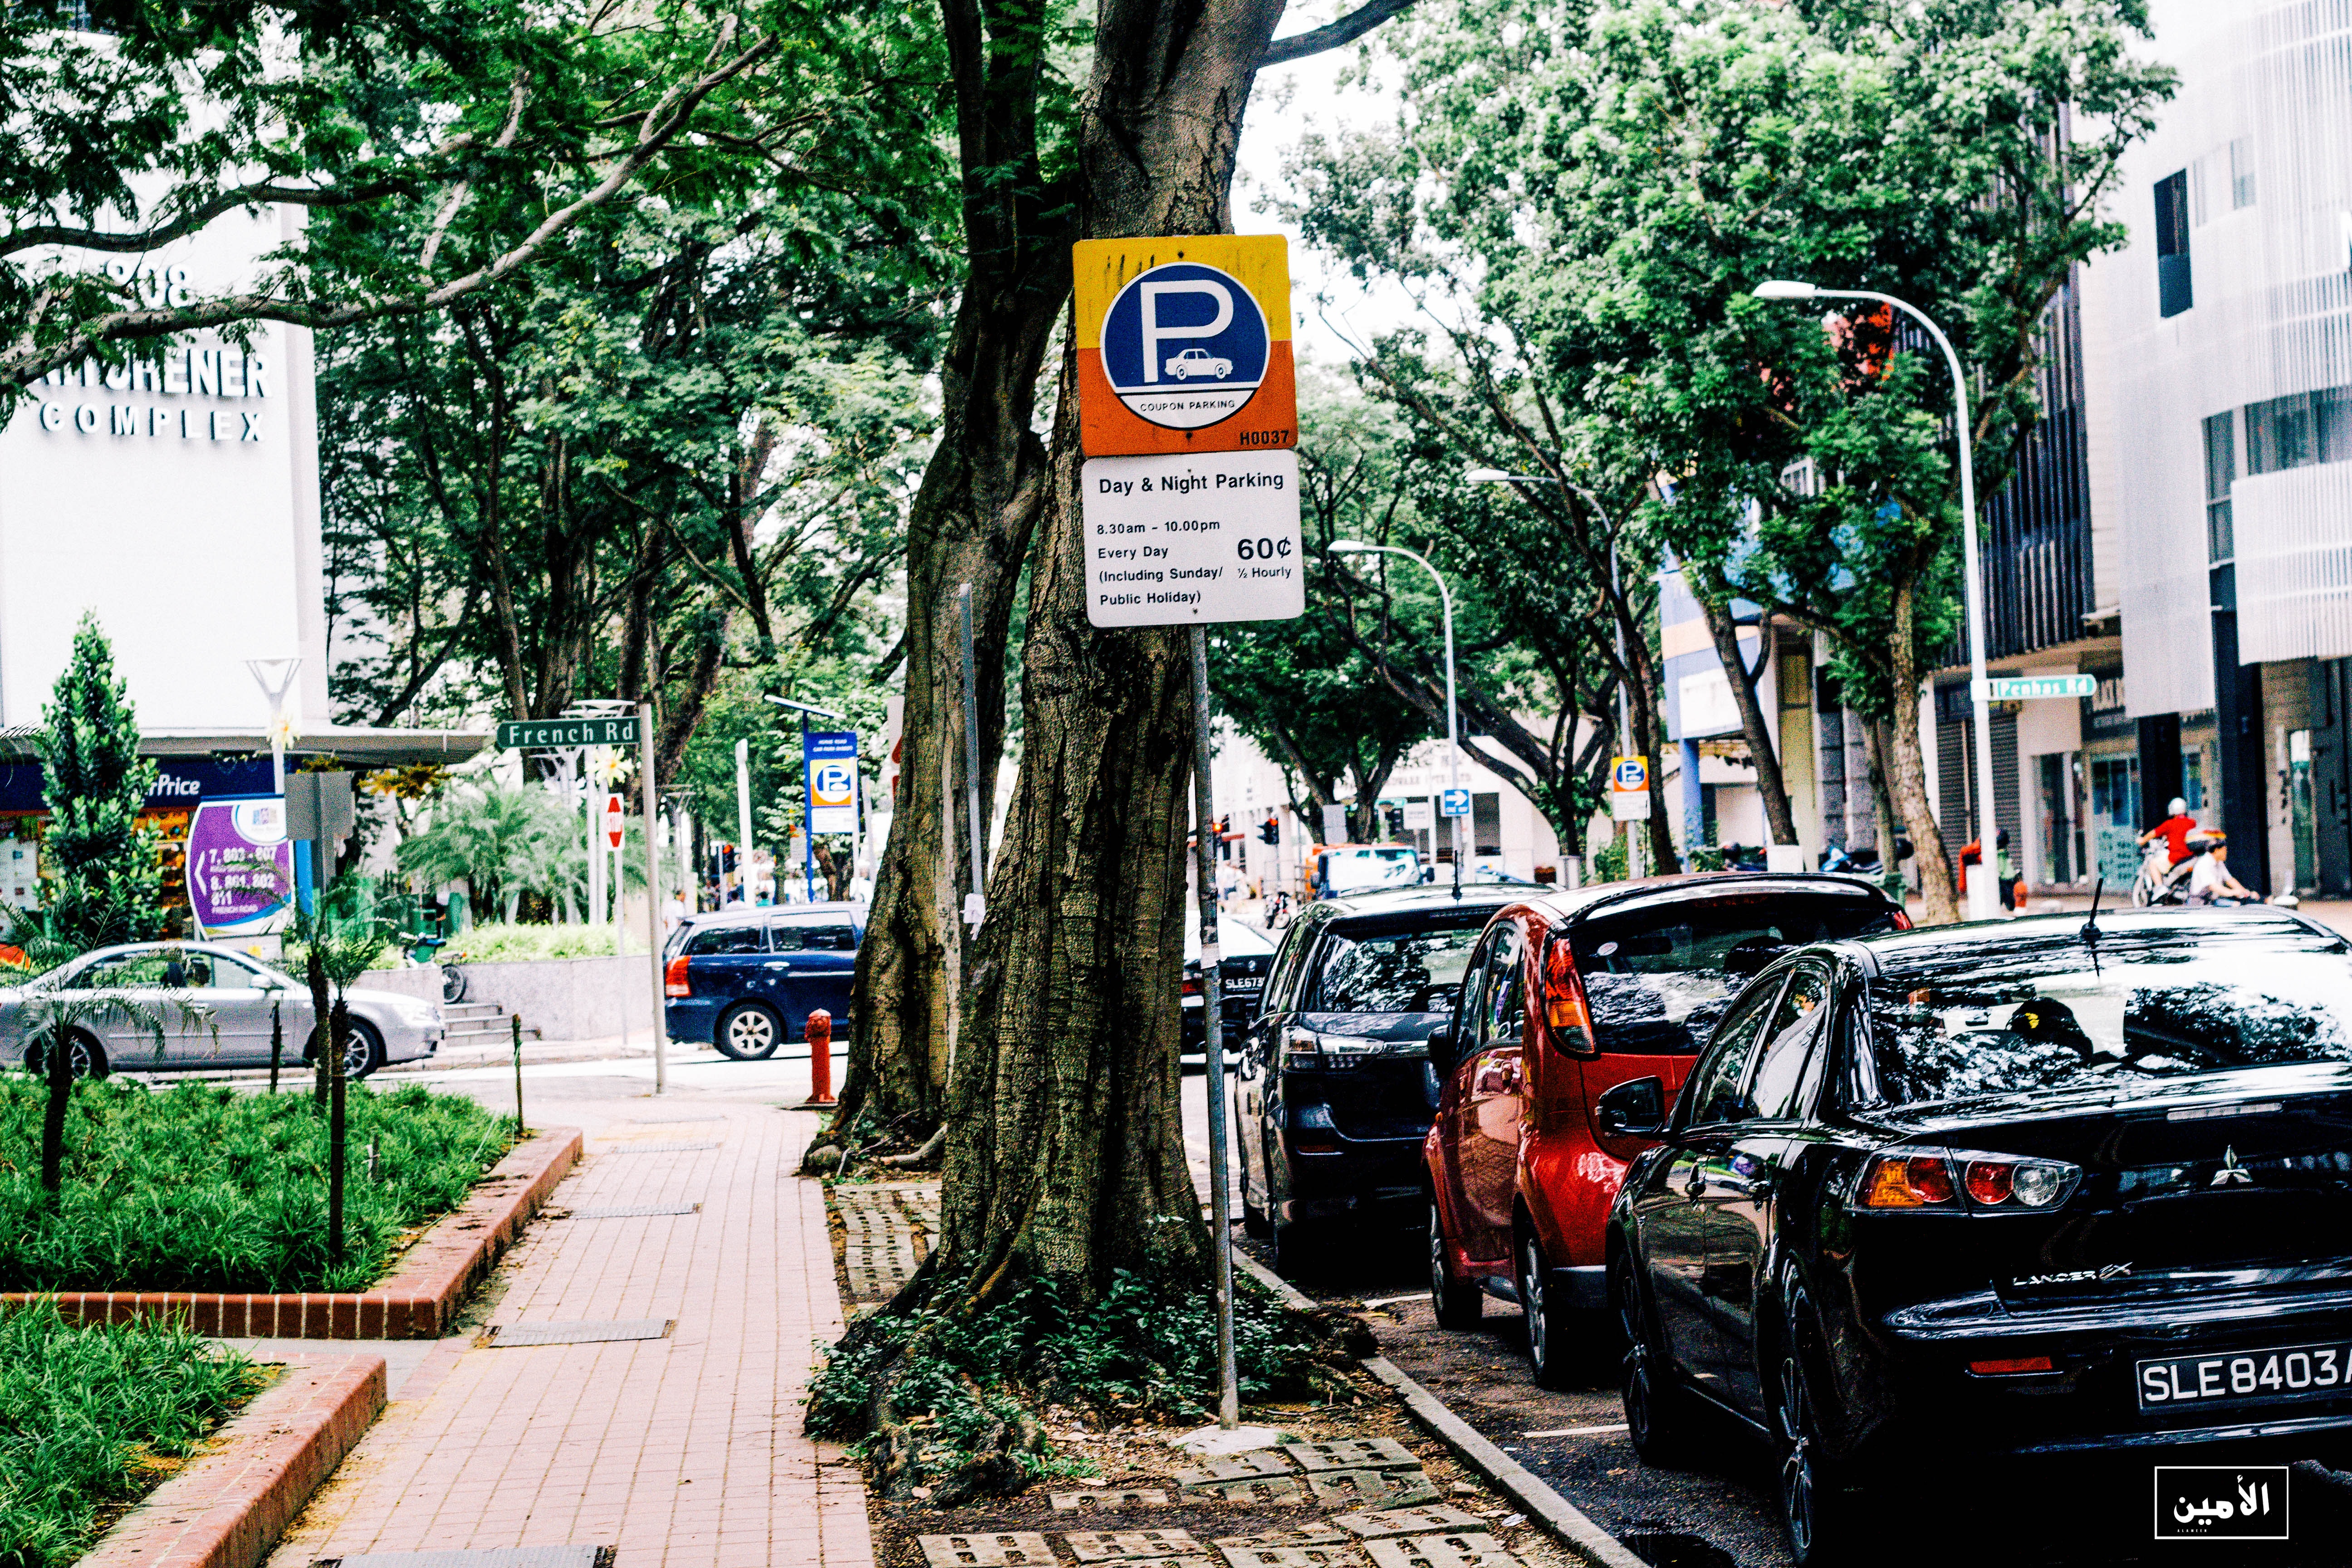 Parking Fines in Singapore